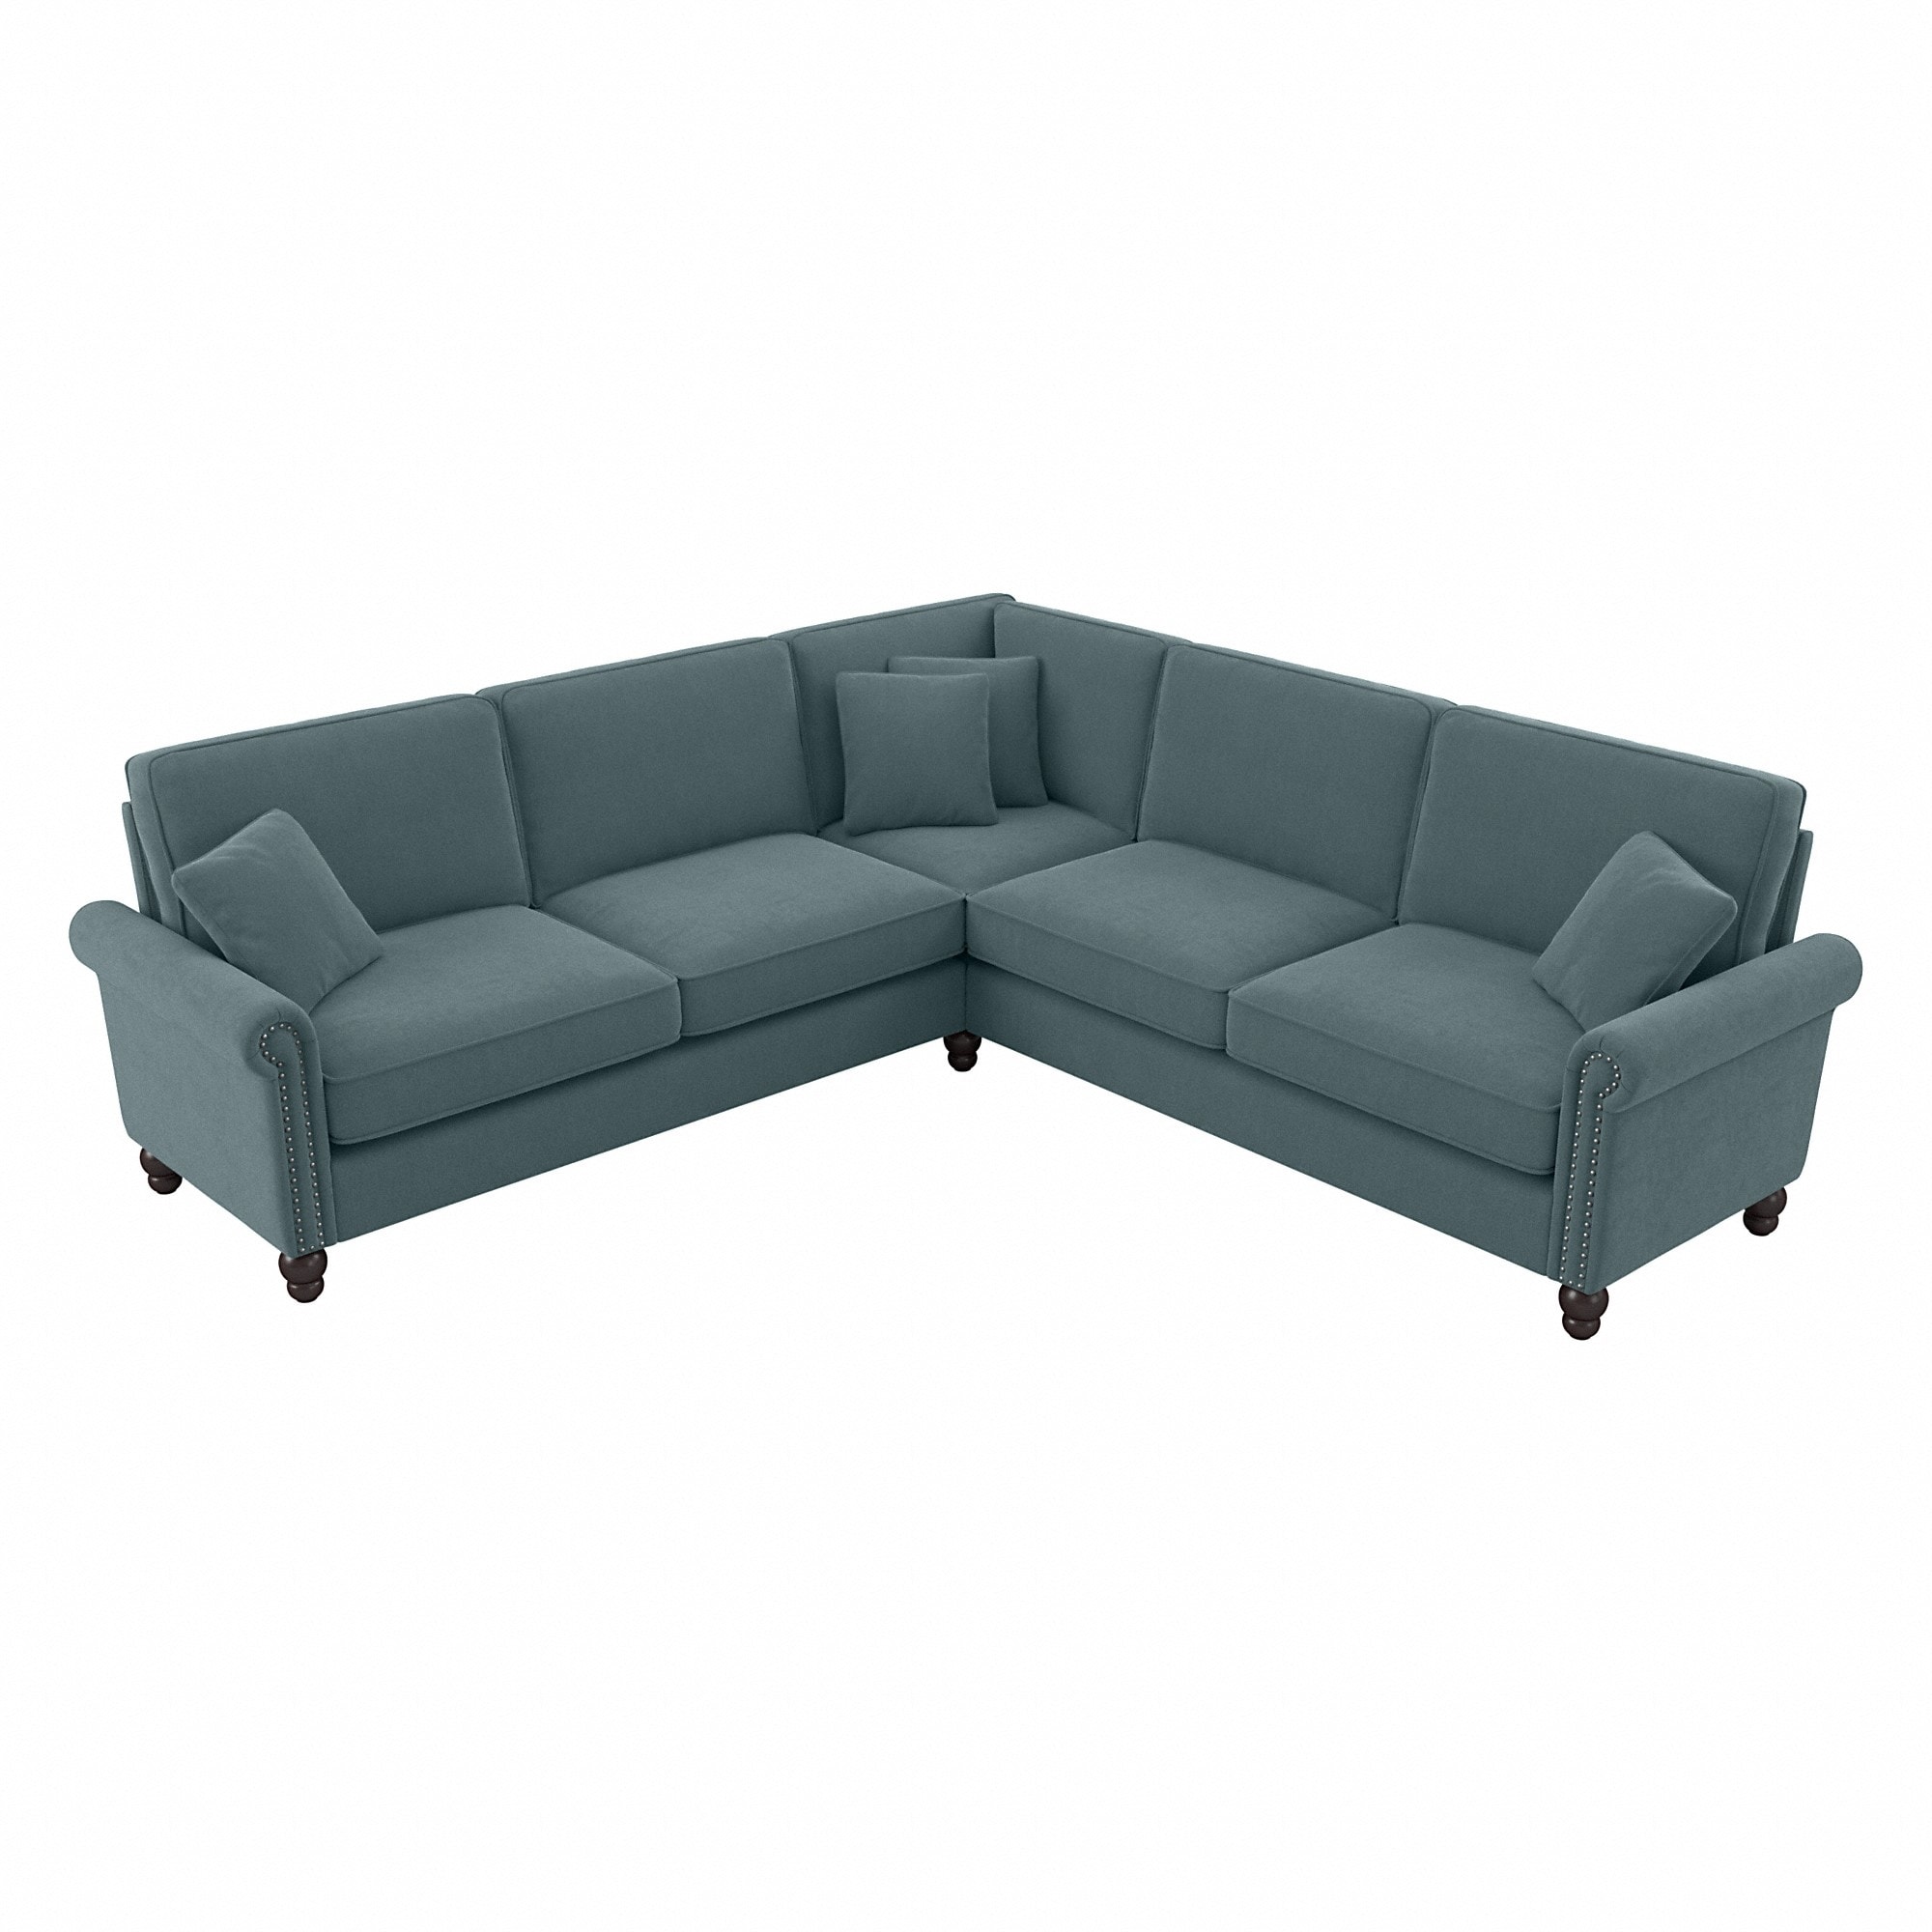 Bush Furniture Coventry 99W L Shaped Sectional Couch by